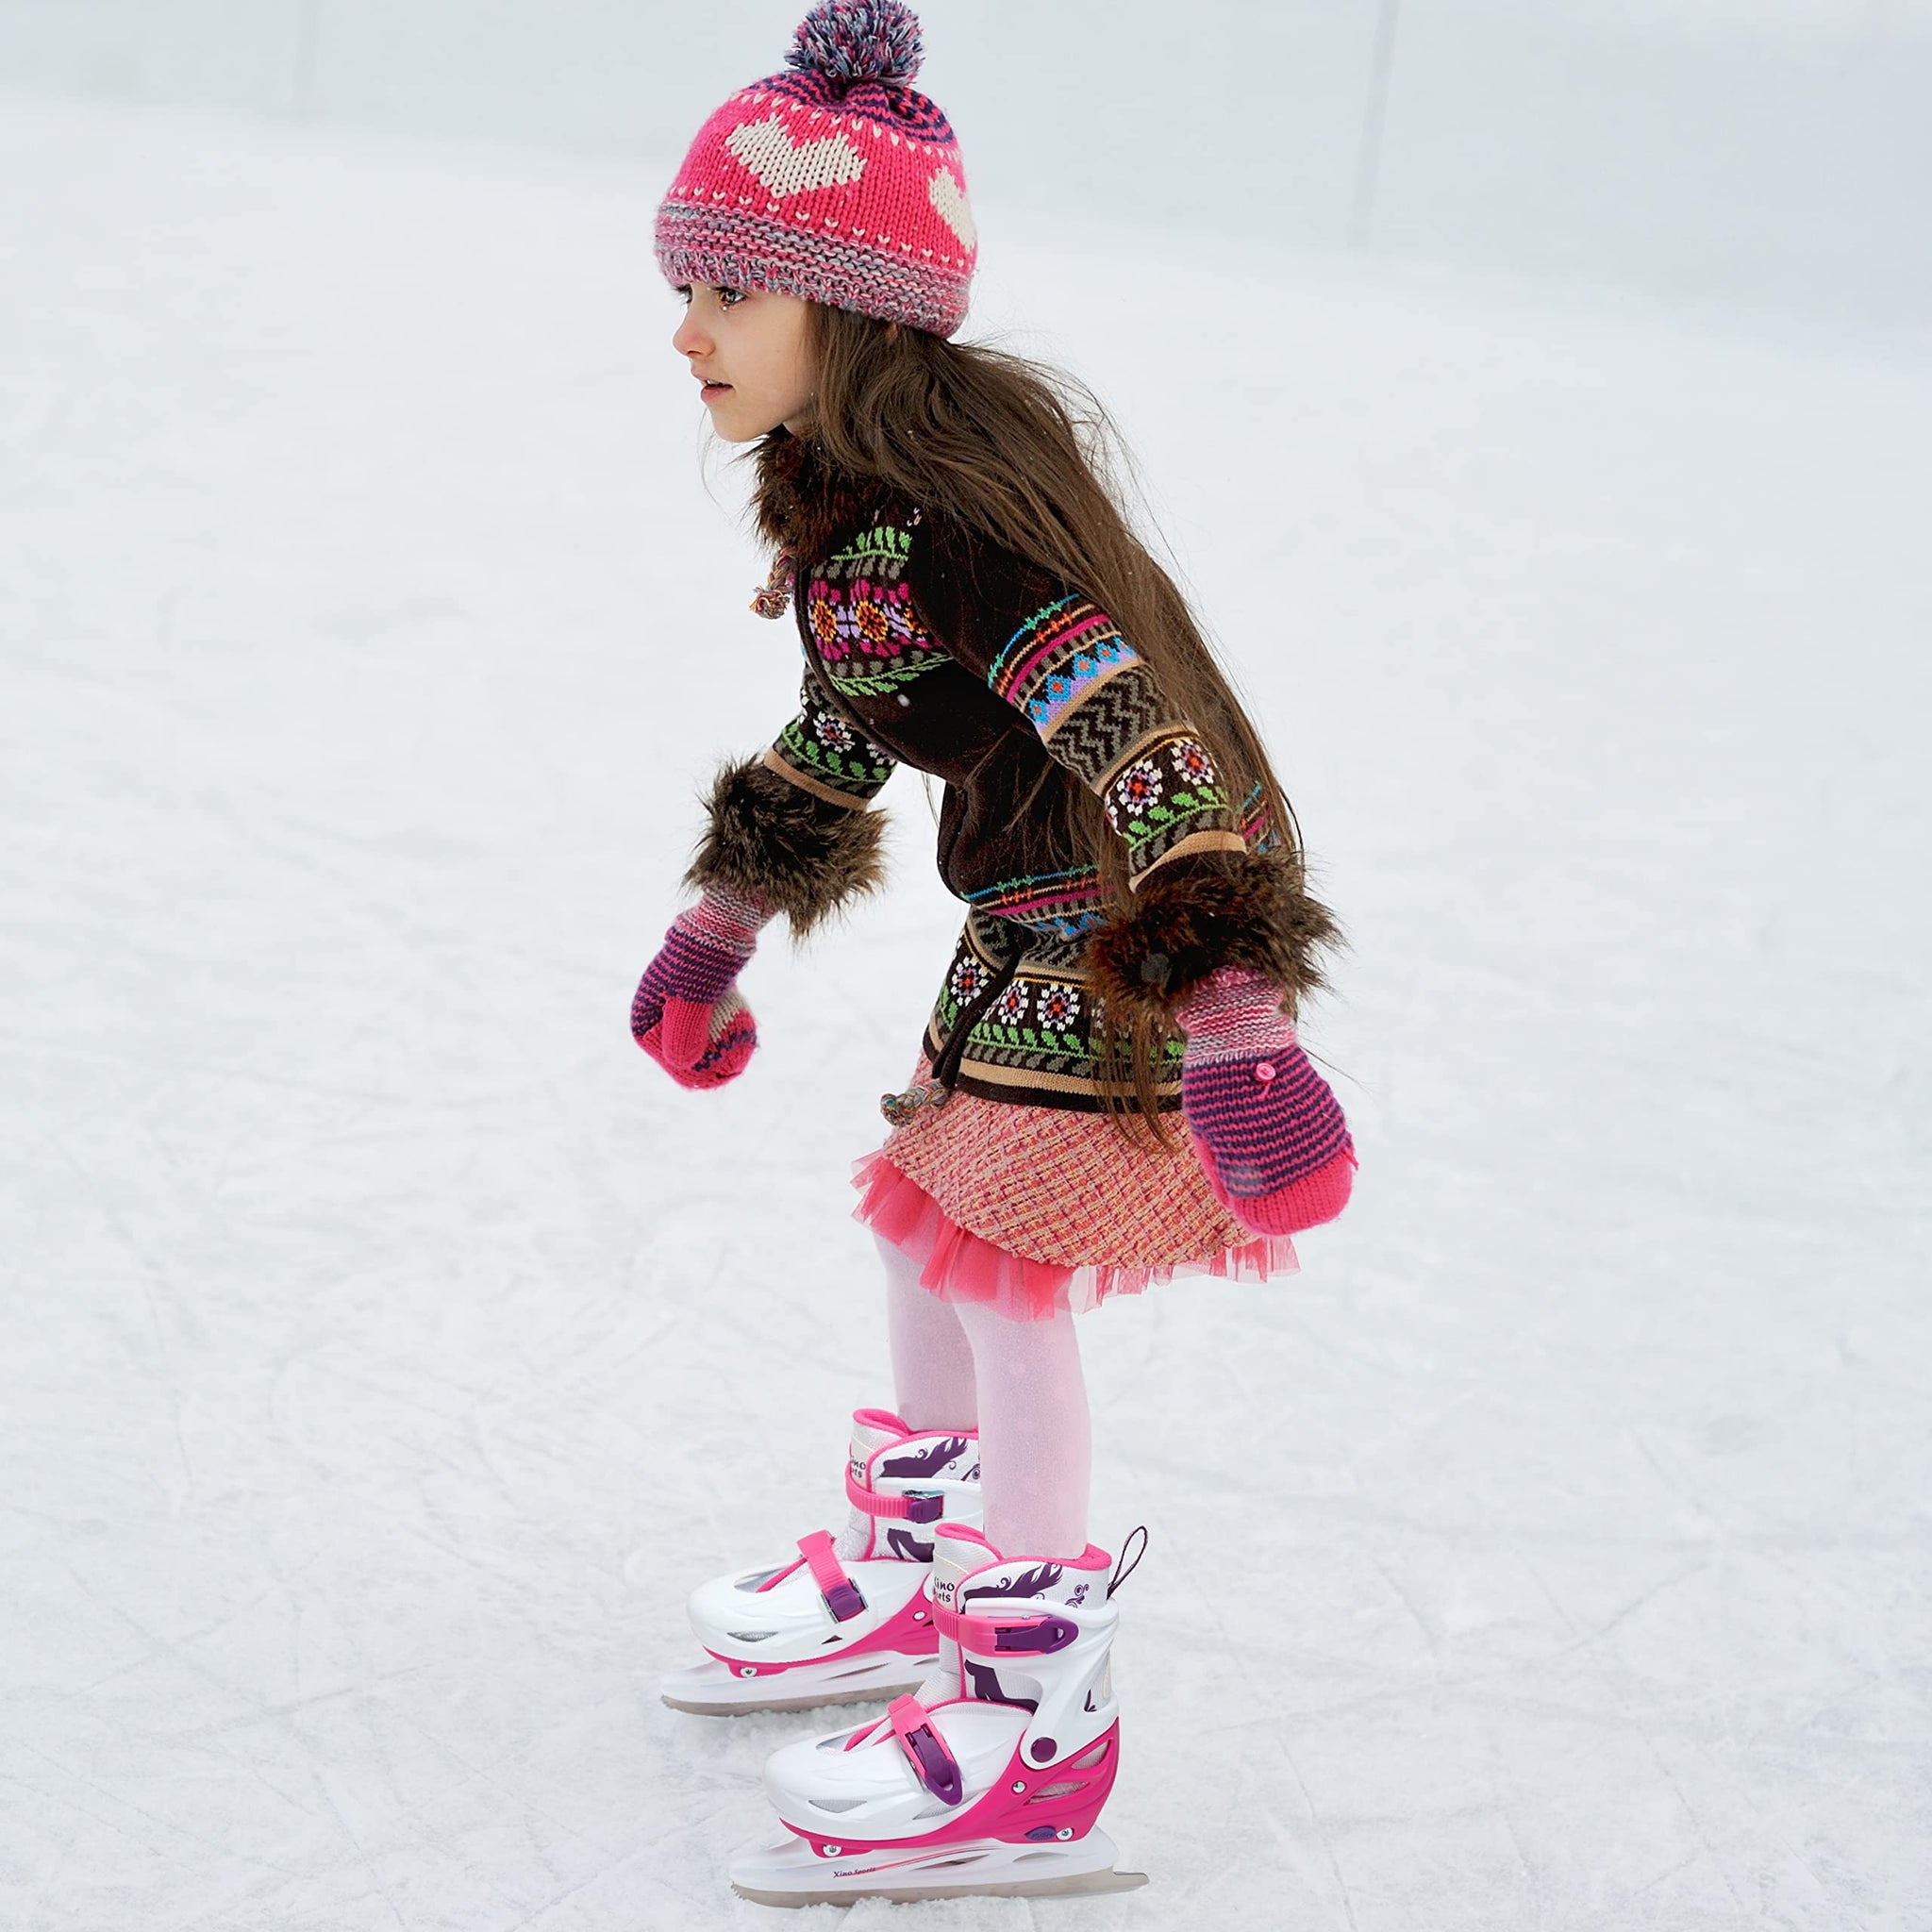 Ice Skates For Kids | Buying Guide And Tips For Beginners | Xino Sports